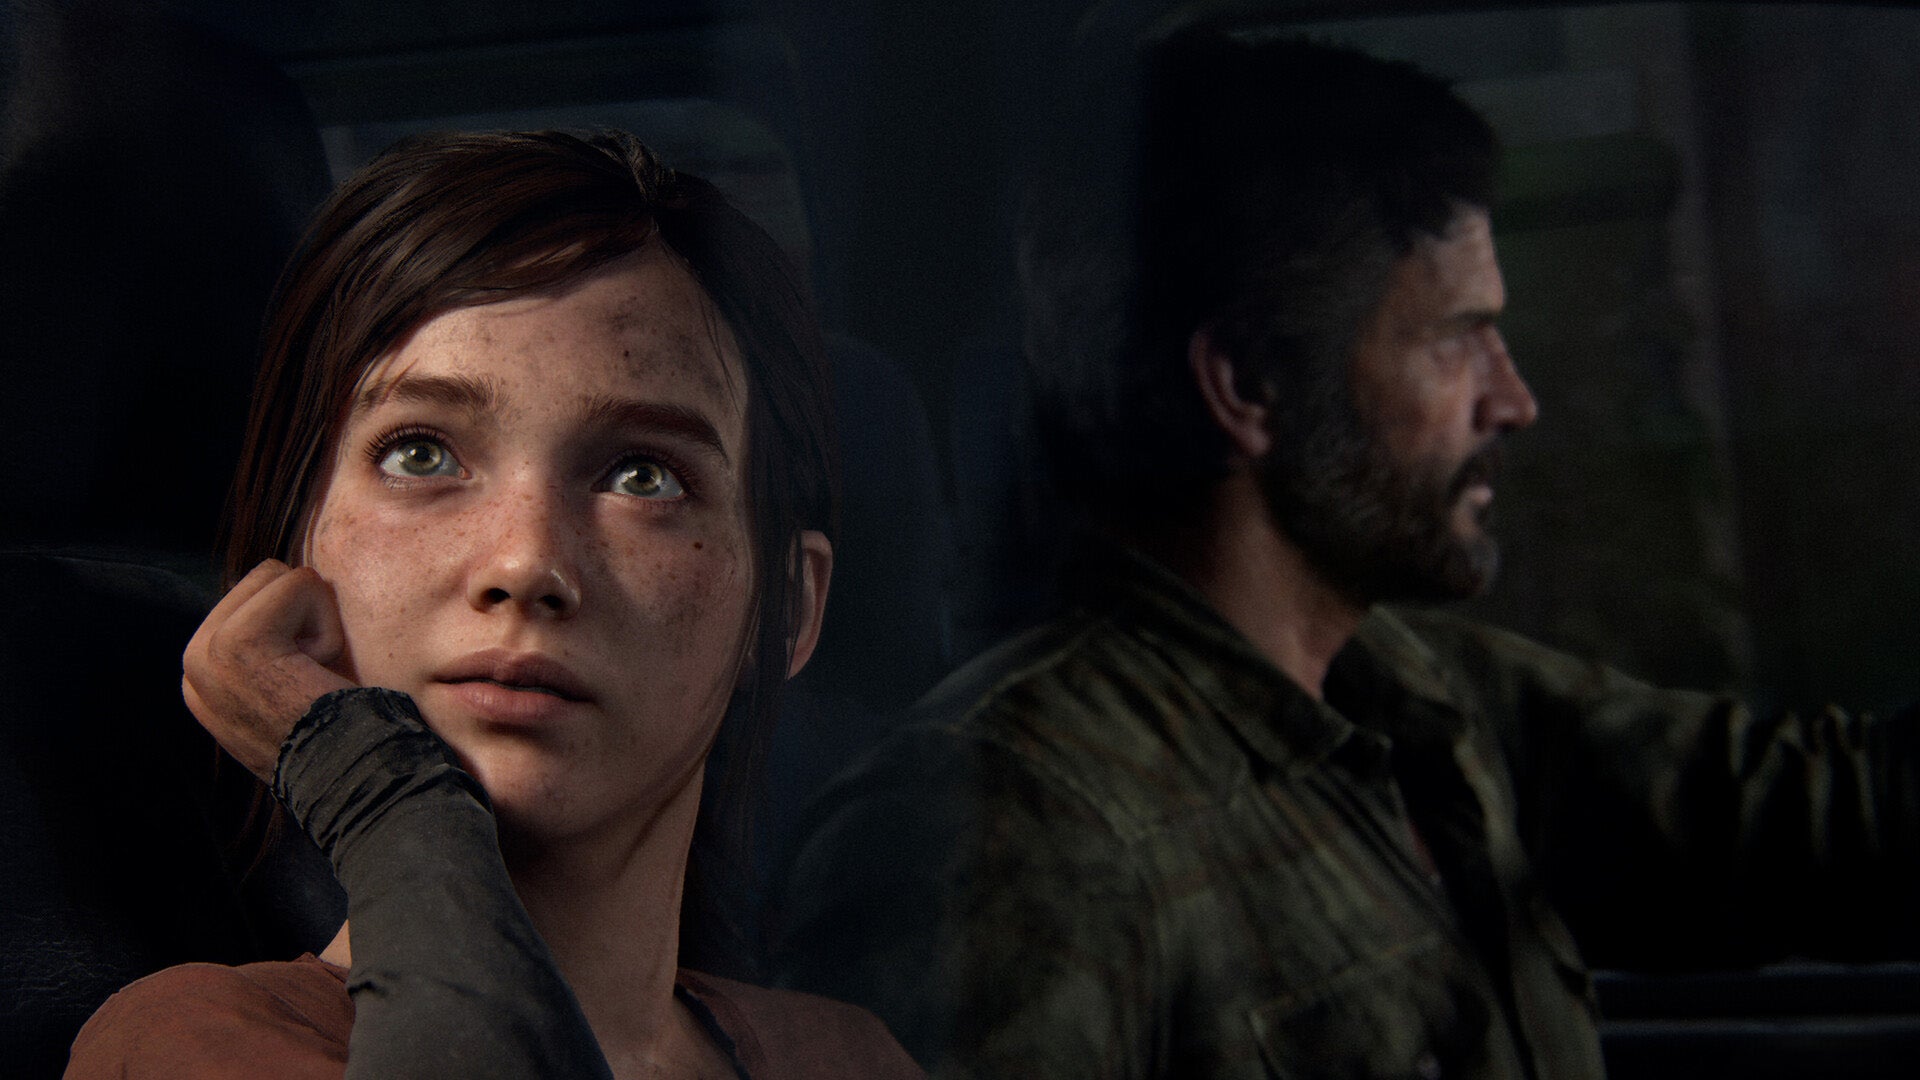 TLOU Episode 6: Fans Think 'The Last of Us' Sneakily Introduced